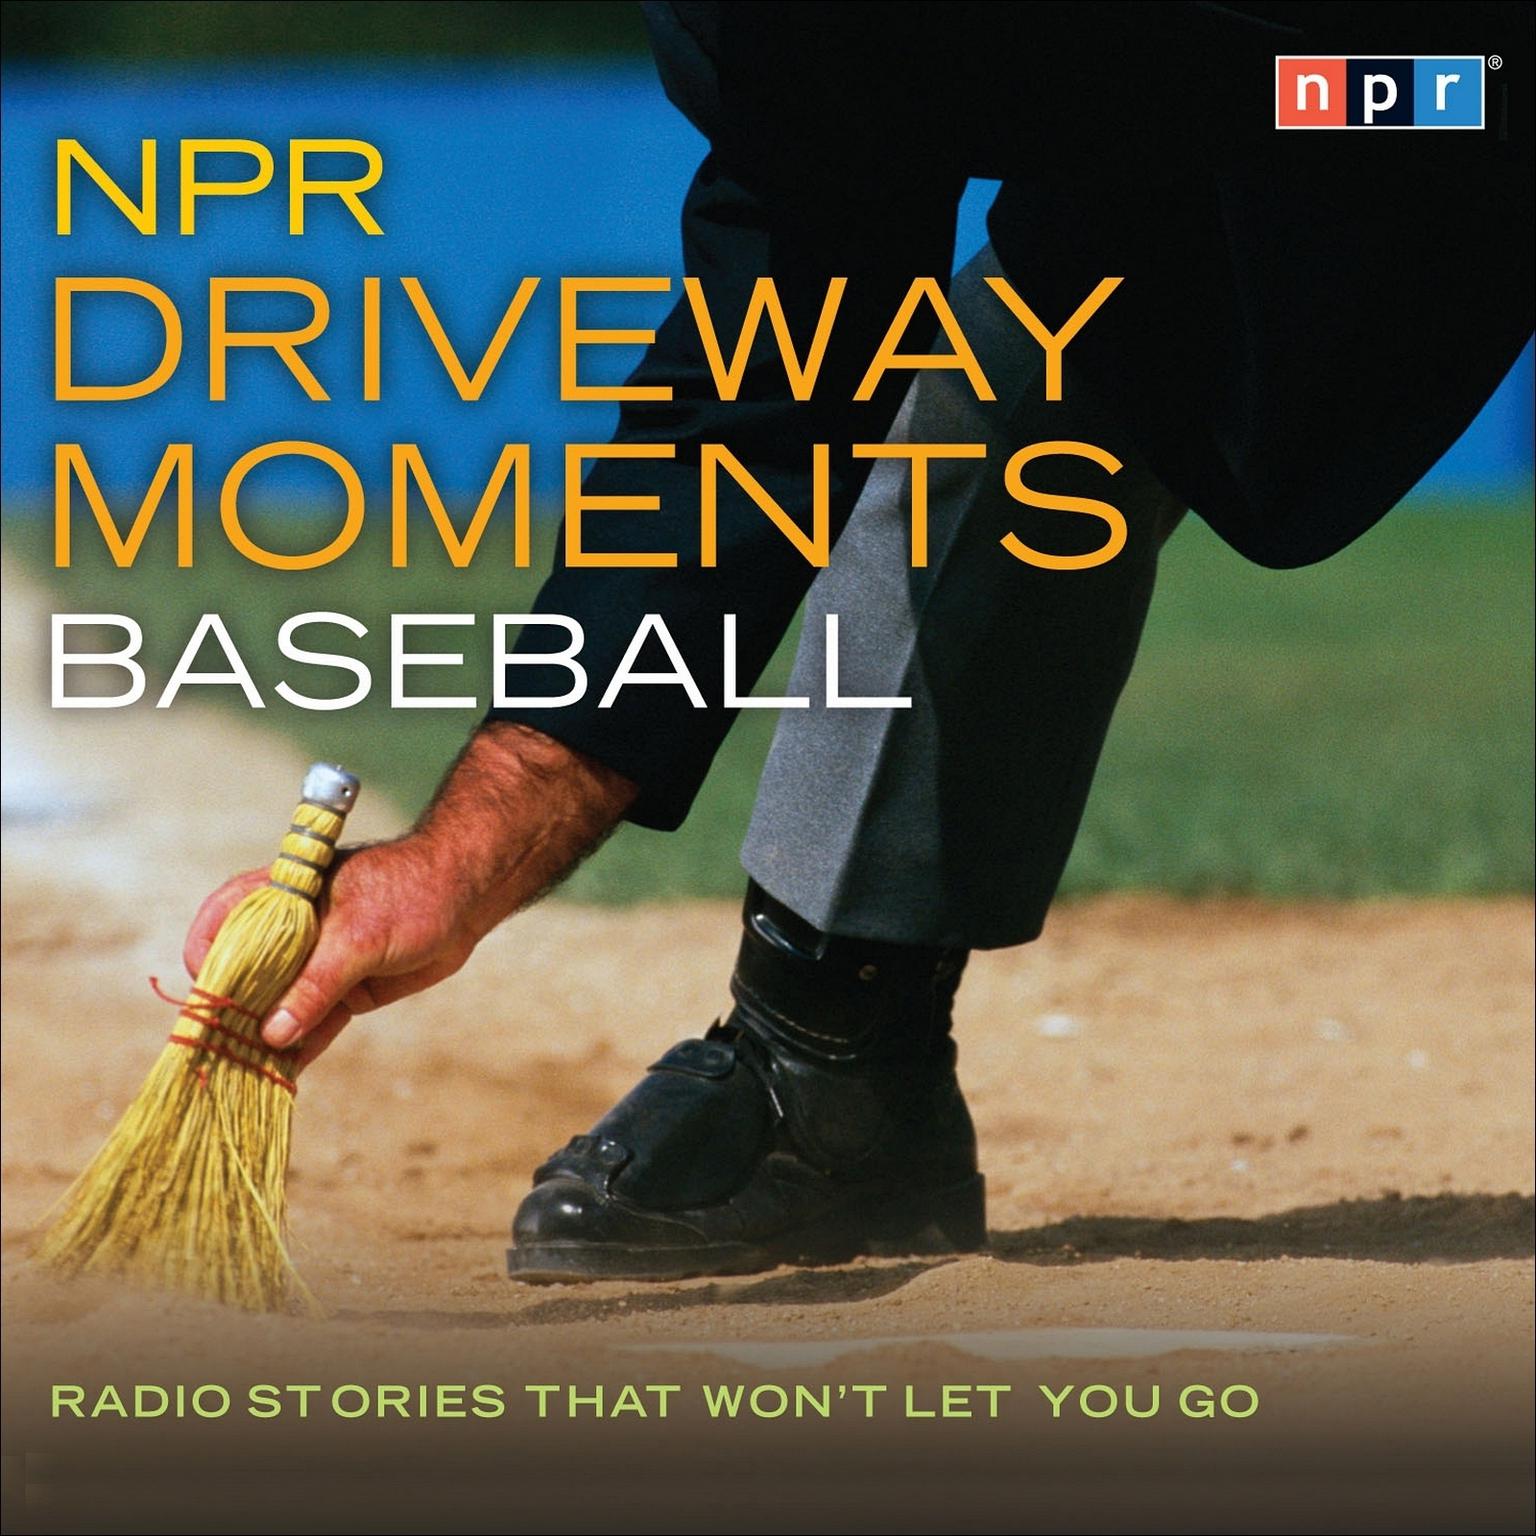 NPR Driveway Moments Baseball: Radio Stories That Wont Let You Go Audiobook, by NPR